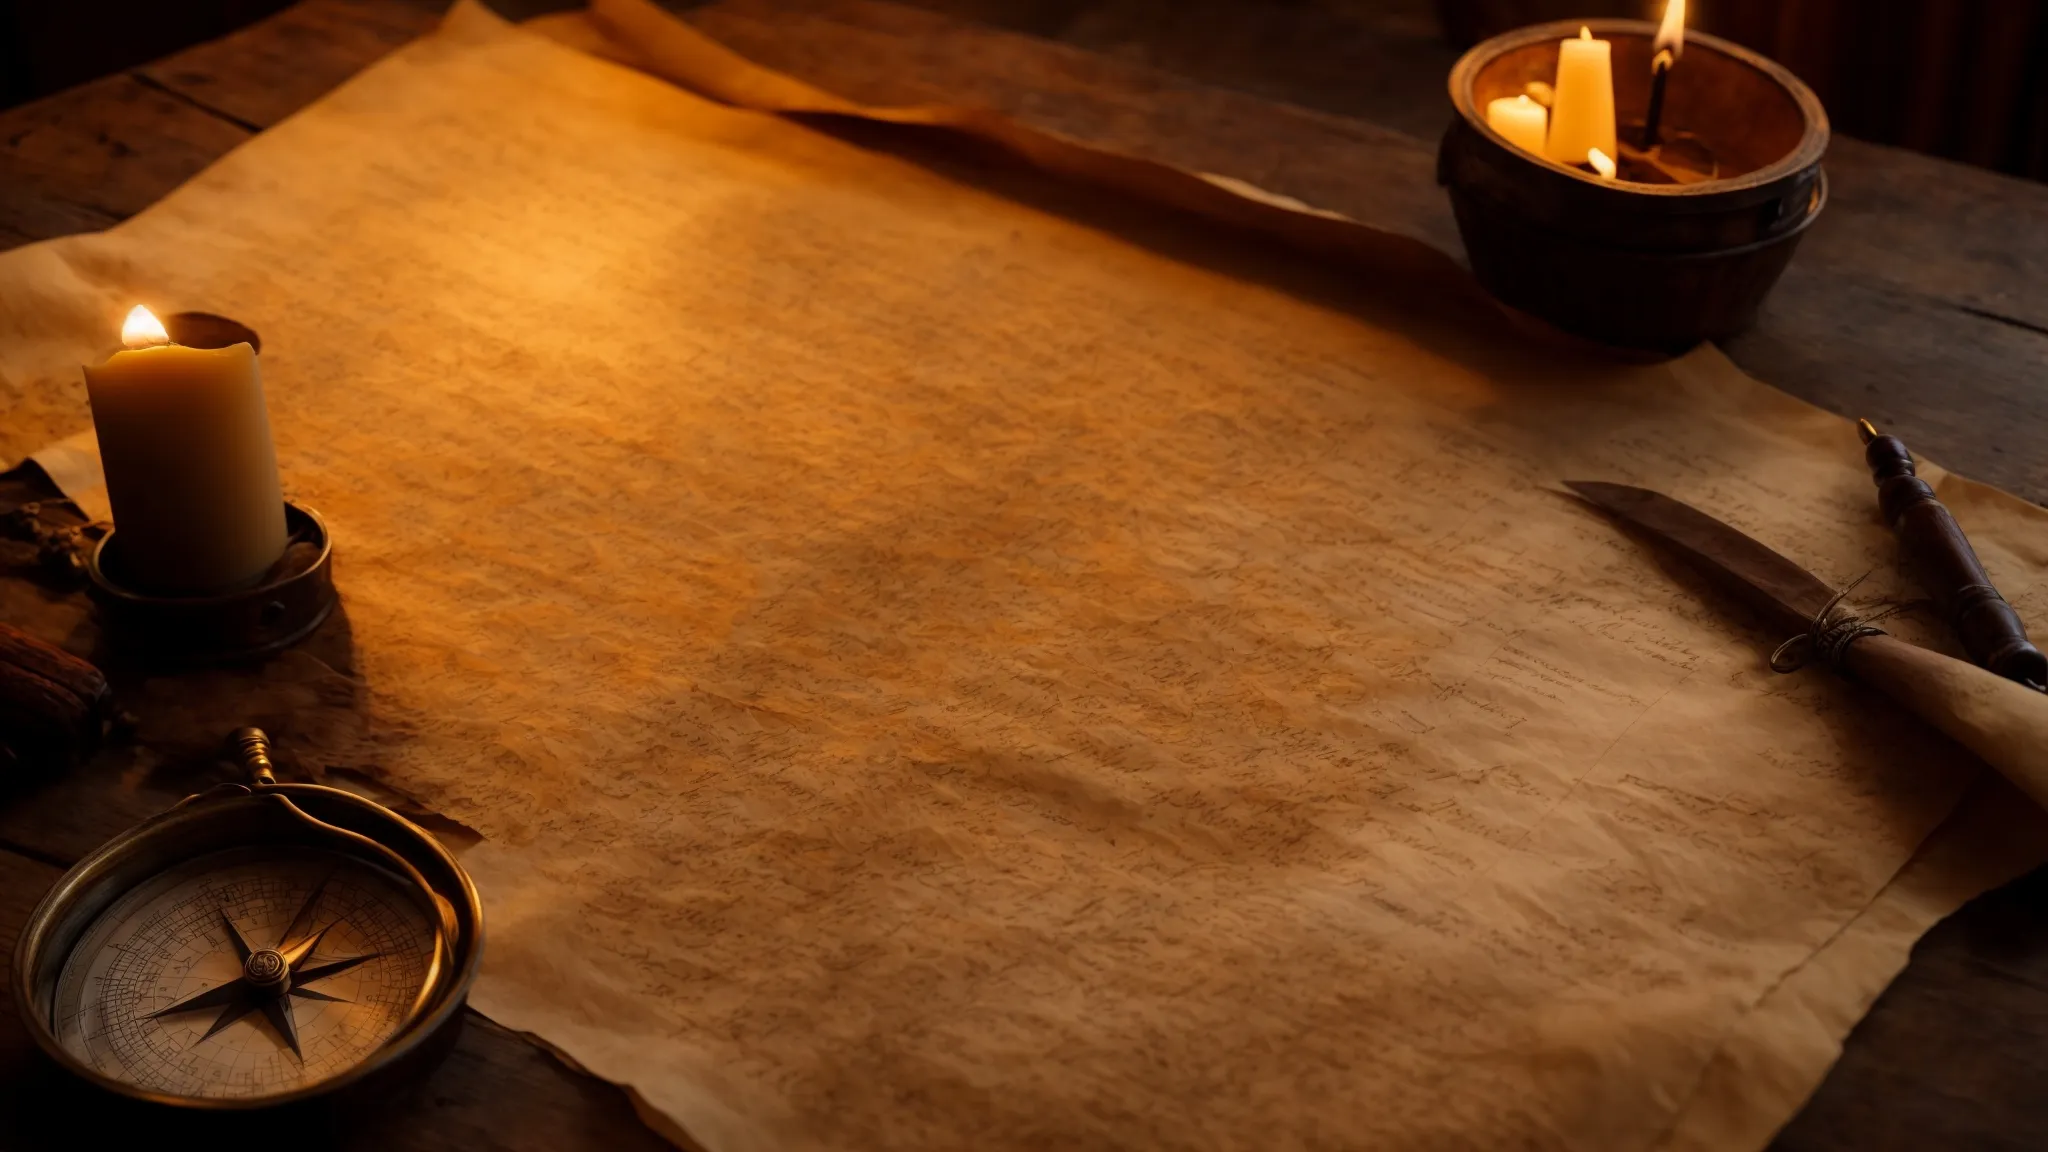 a weathered parchment map sprawled on a wooden table, compass and quill alongside, bathed in the glow of a flickering candle.